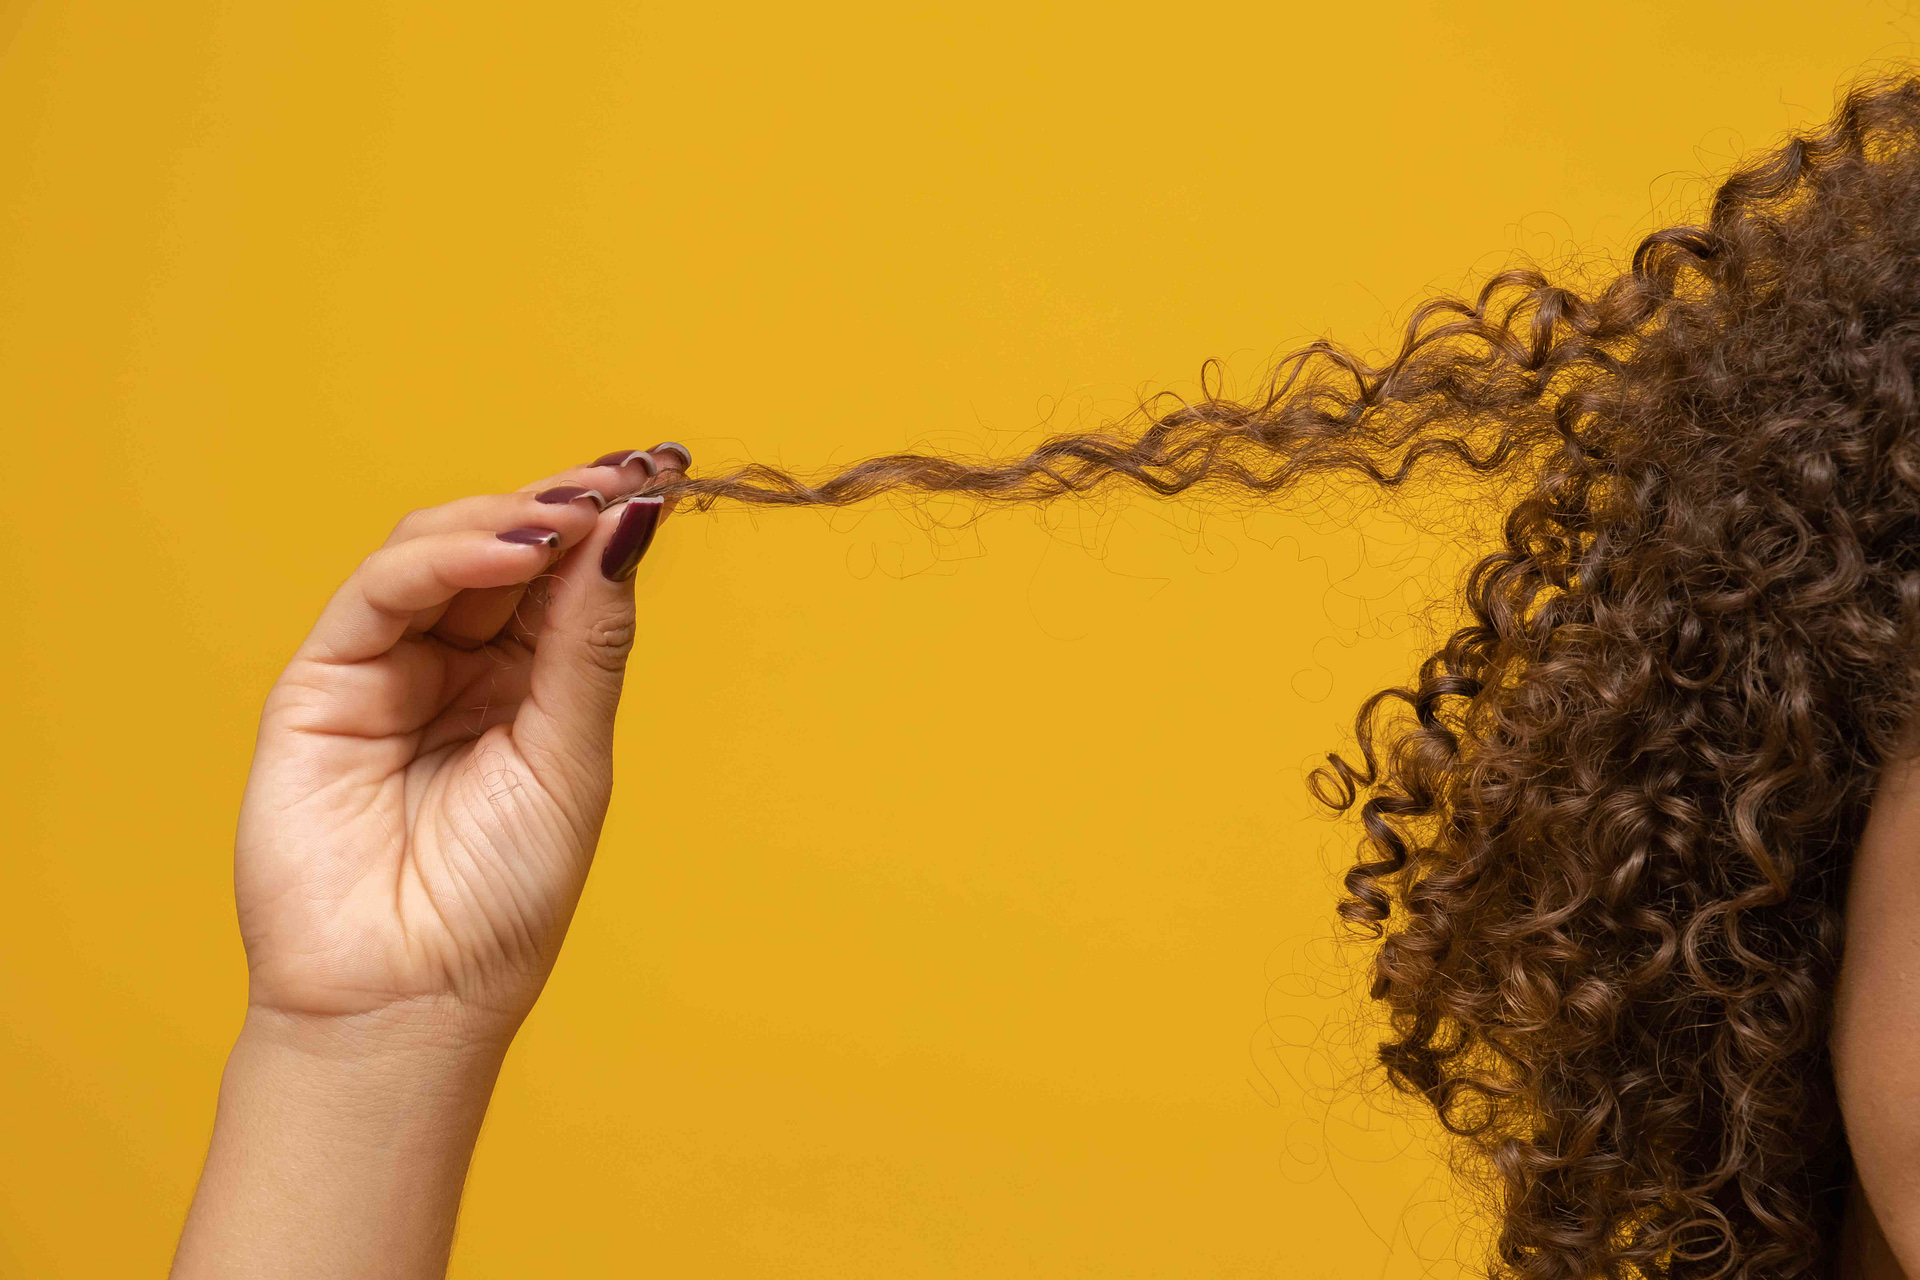 Woman pulling and looking at troublesome strands of frizzy hair.